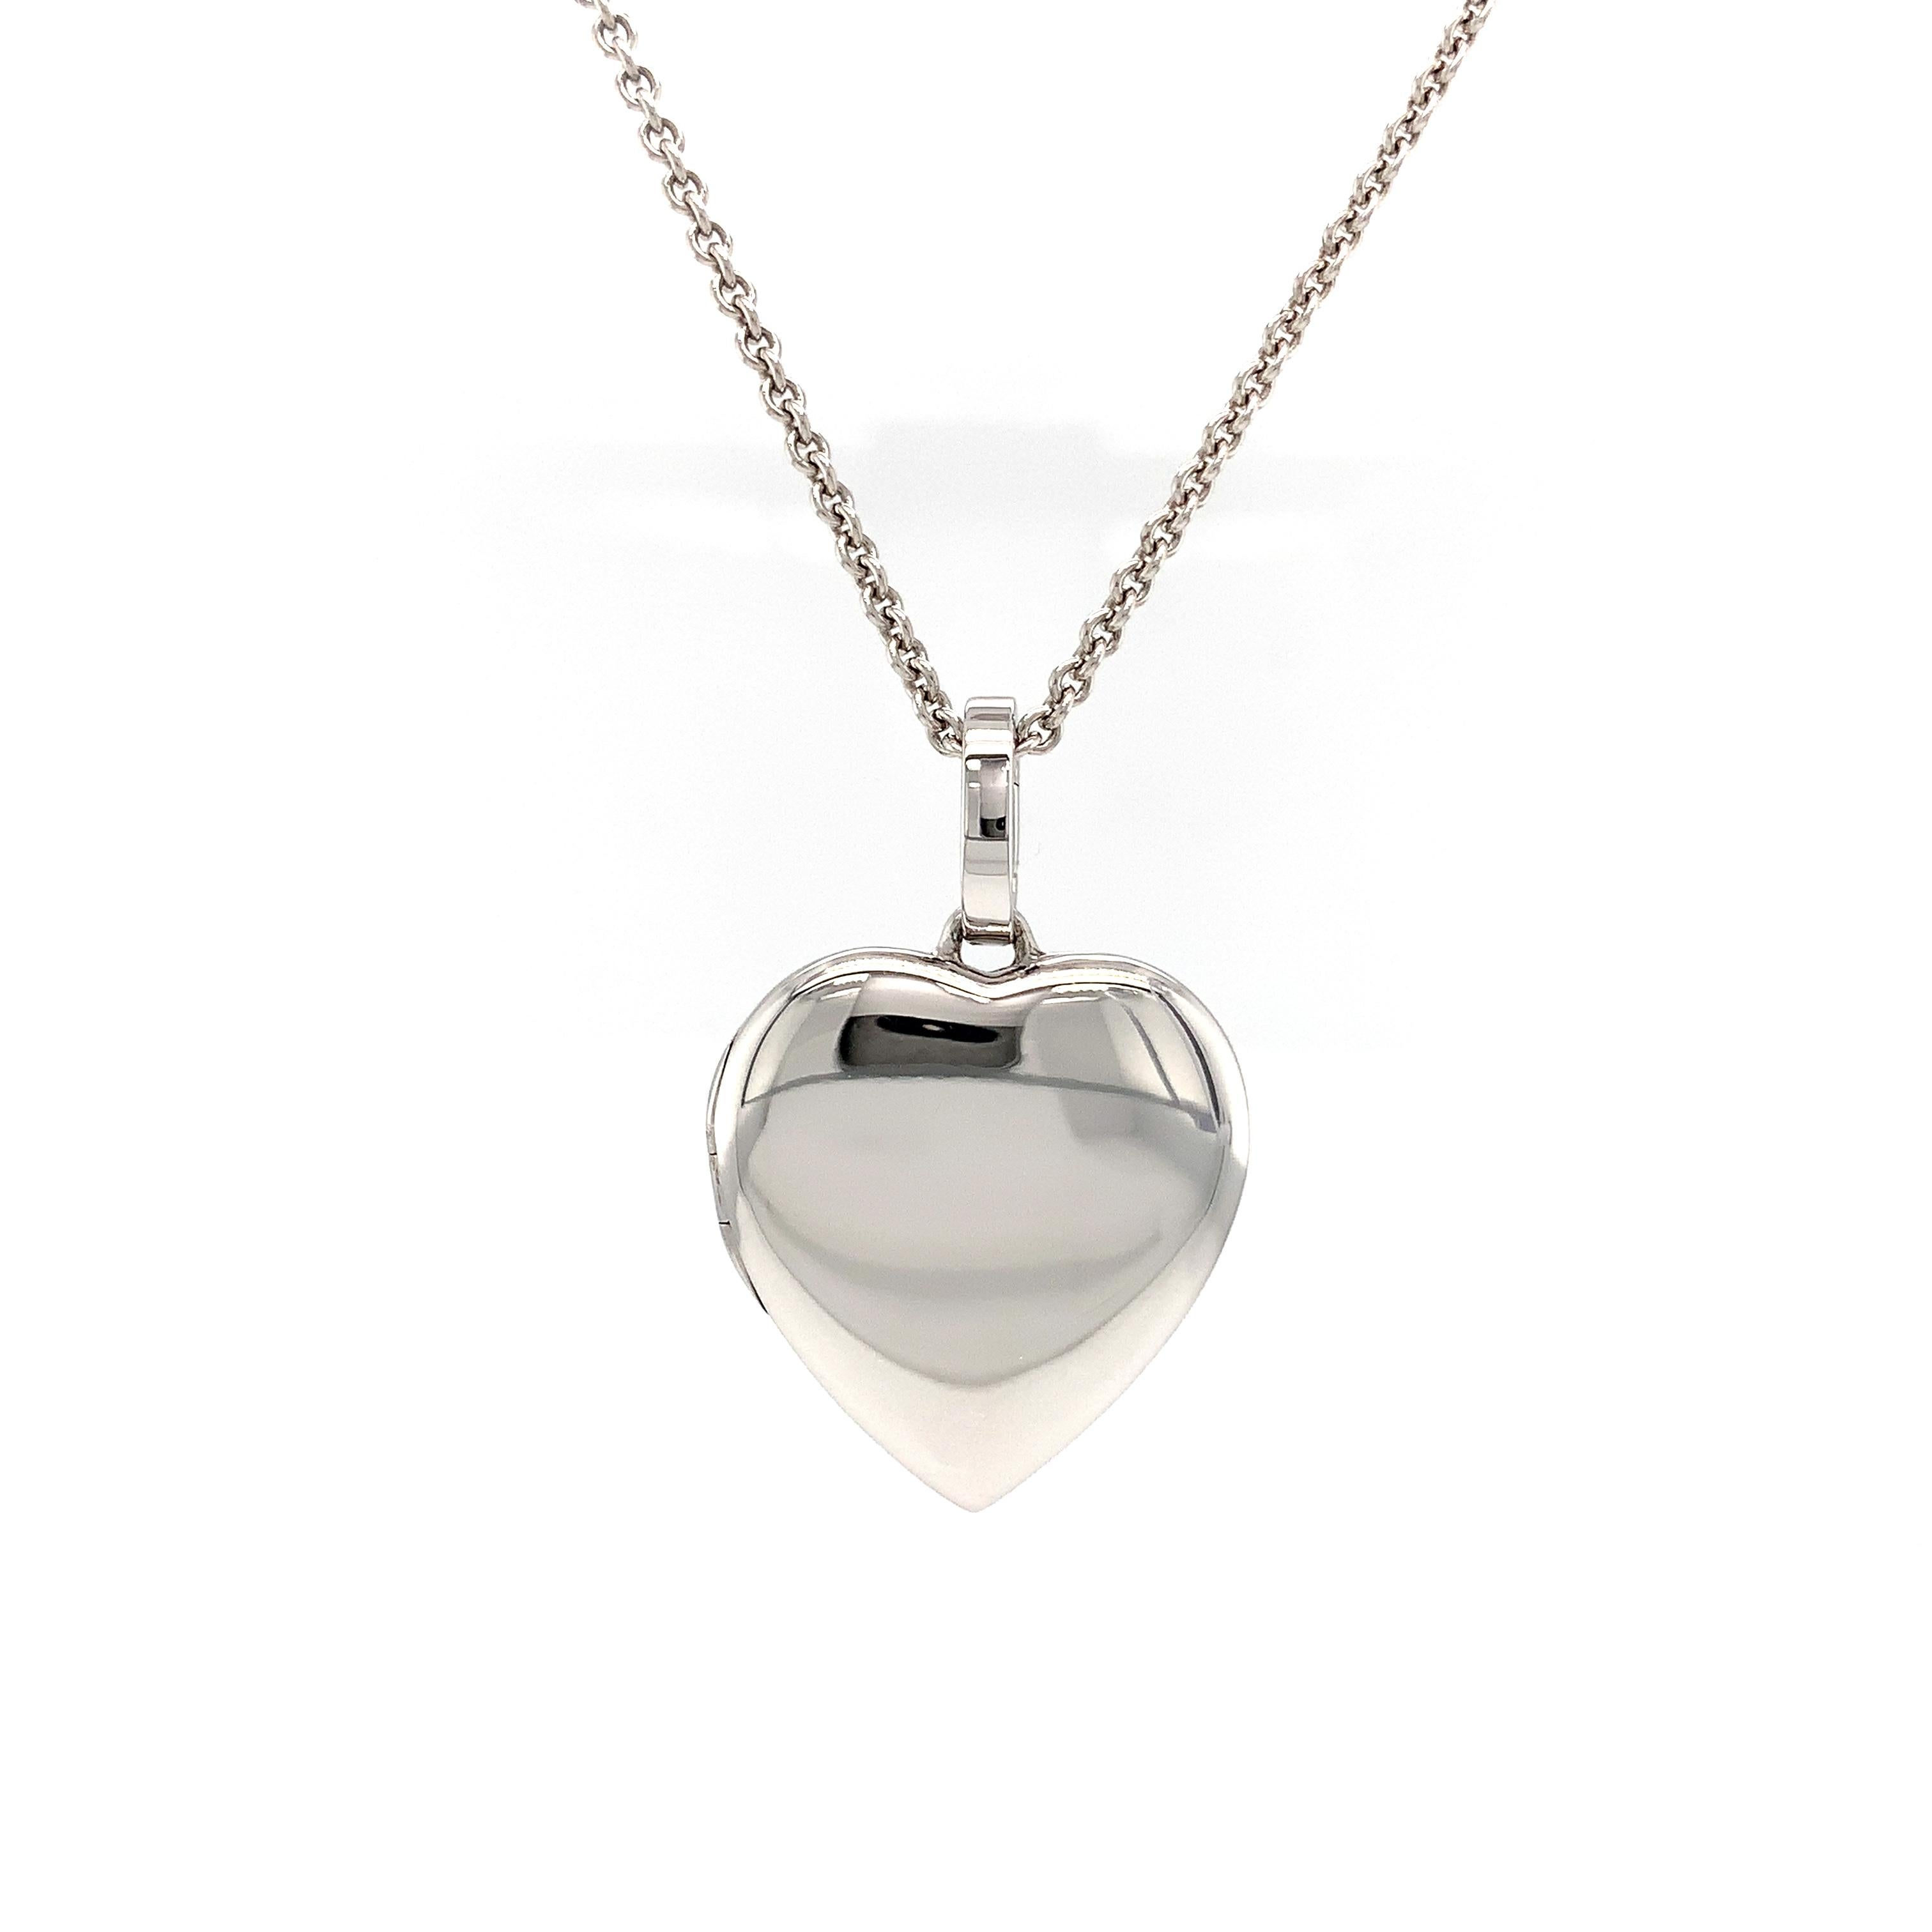 Heart Shaped Locket Pendant Necklace - 18k Polished White Gold - 23.0 x 25.0 mm For Sale 2